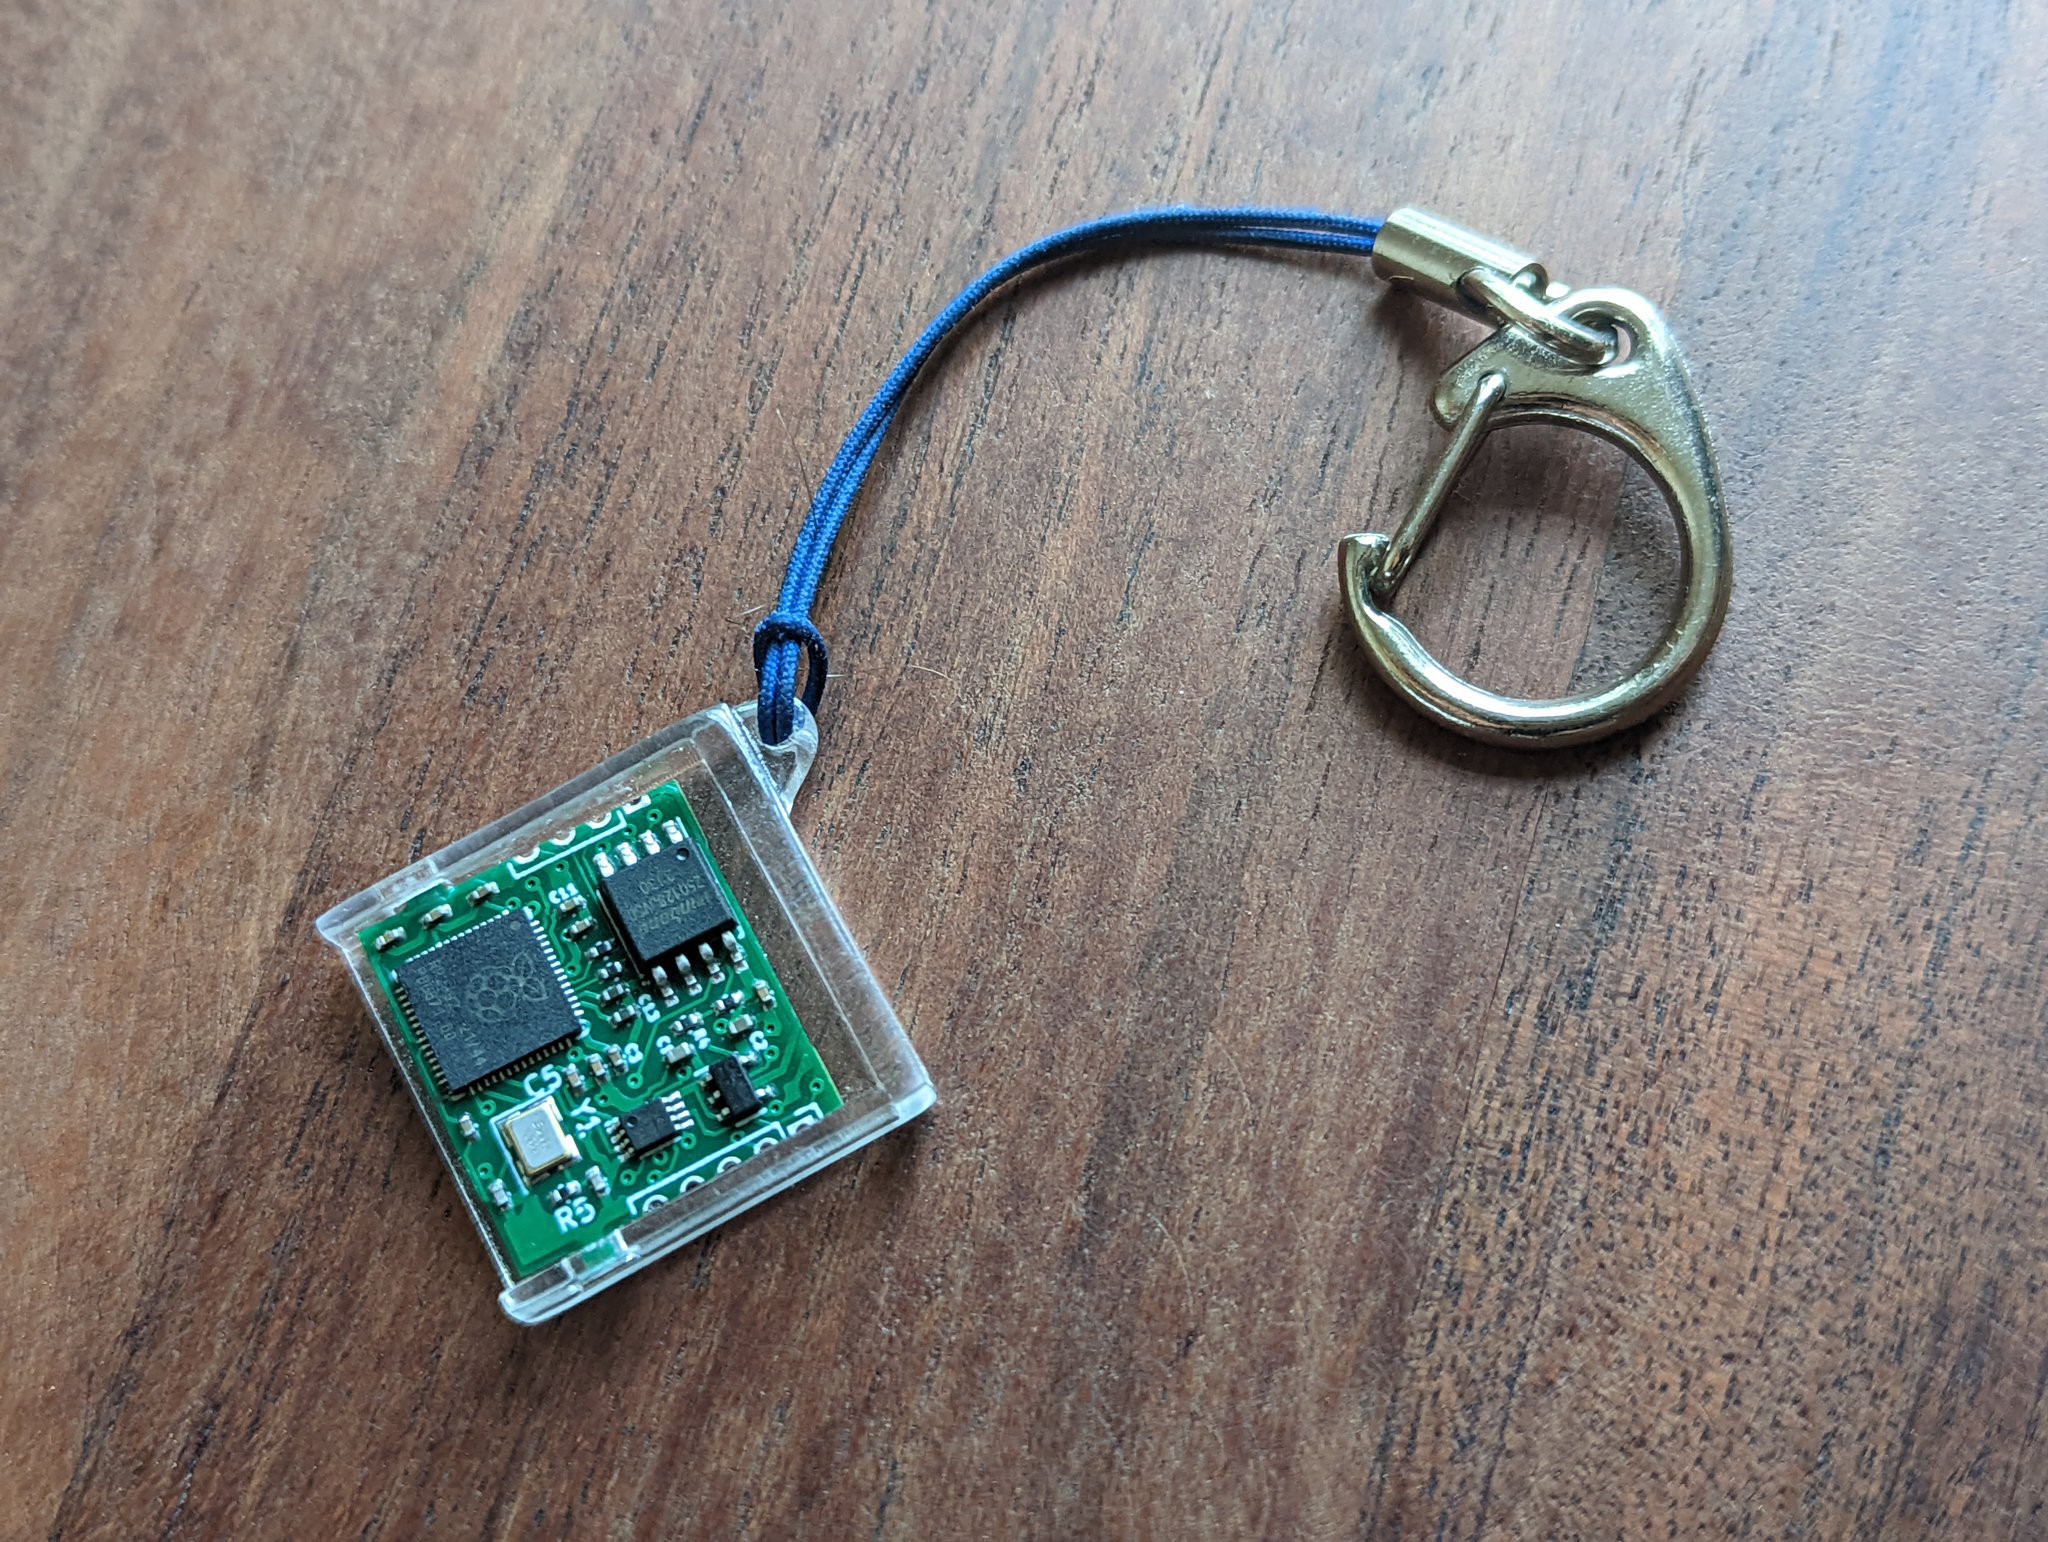 Reverse engineering a Hit Clip